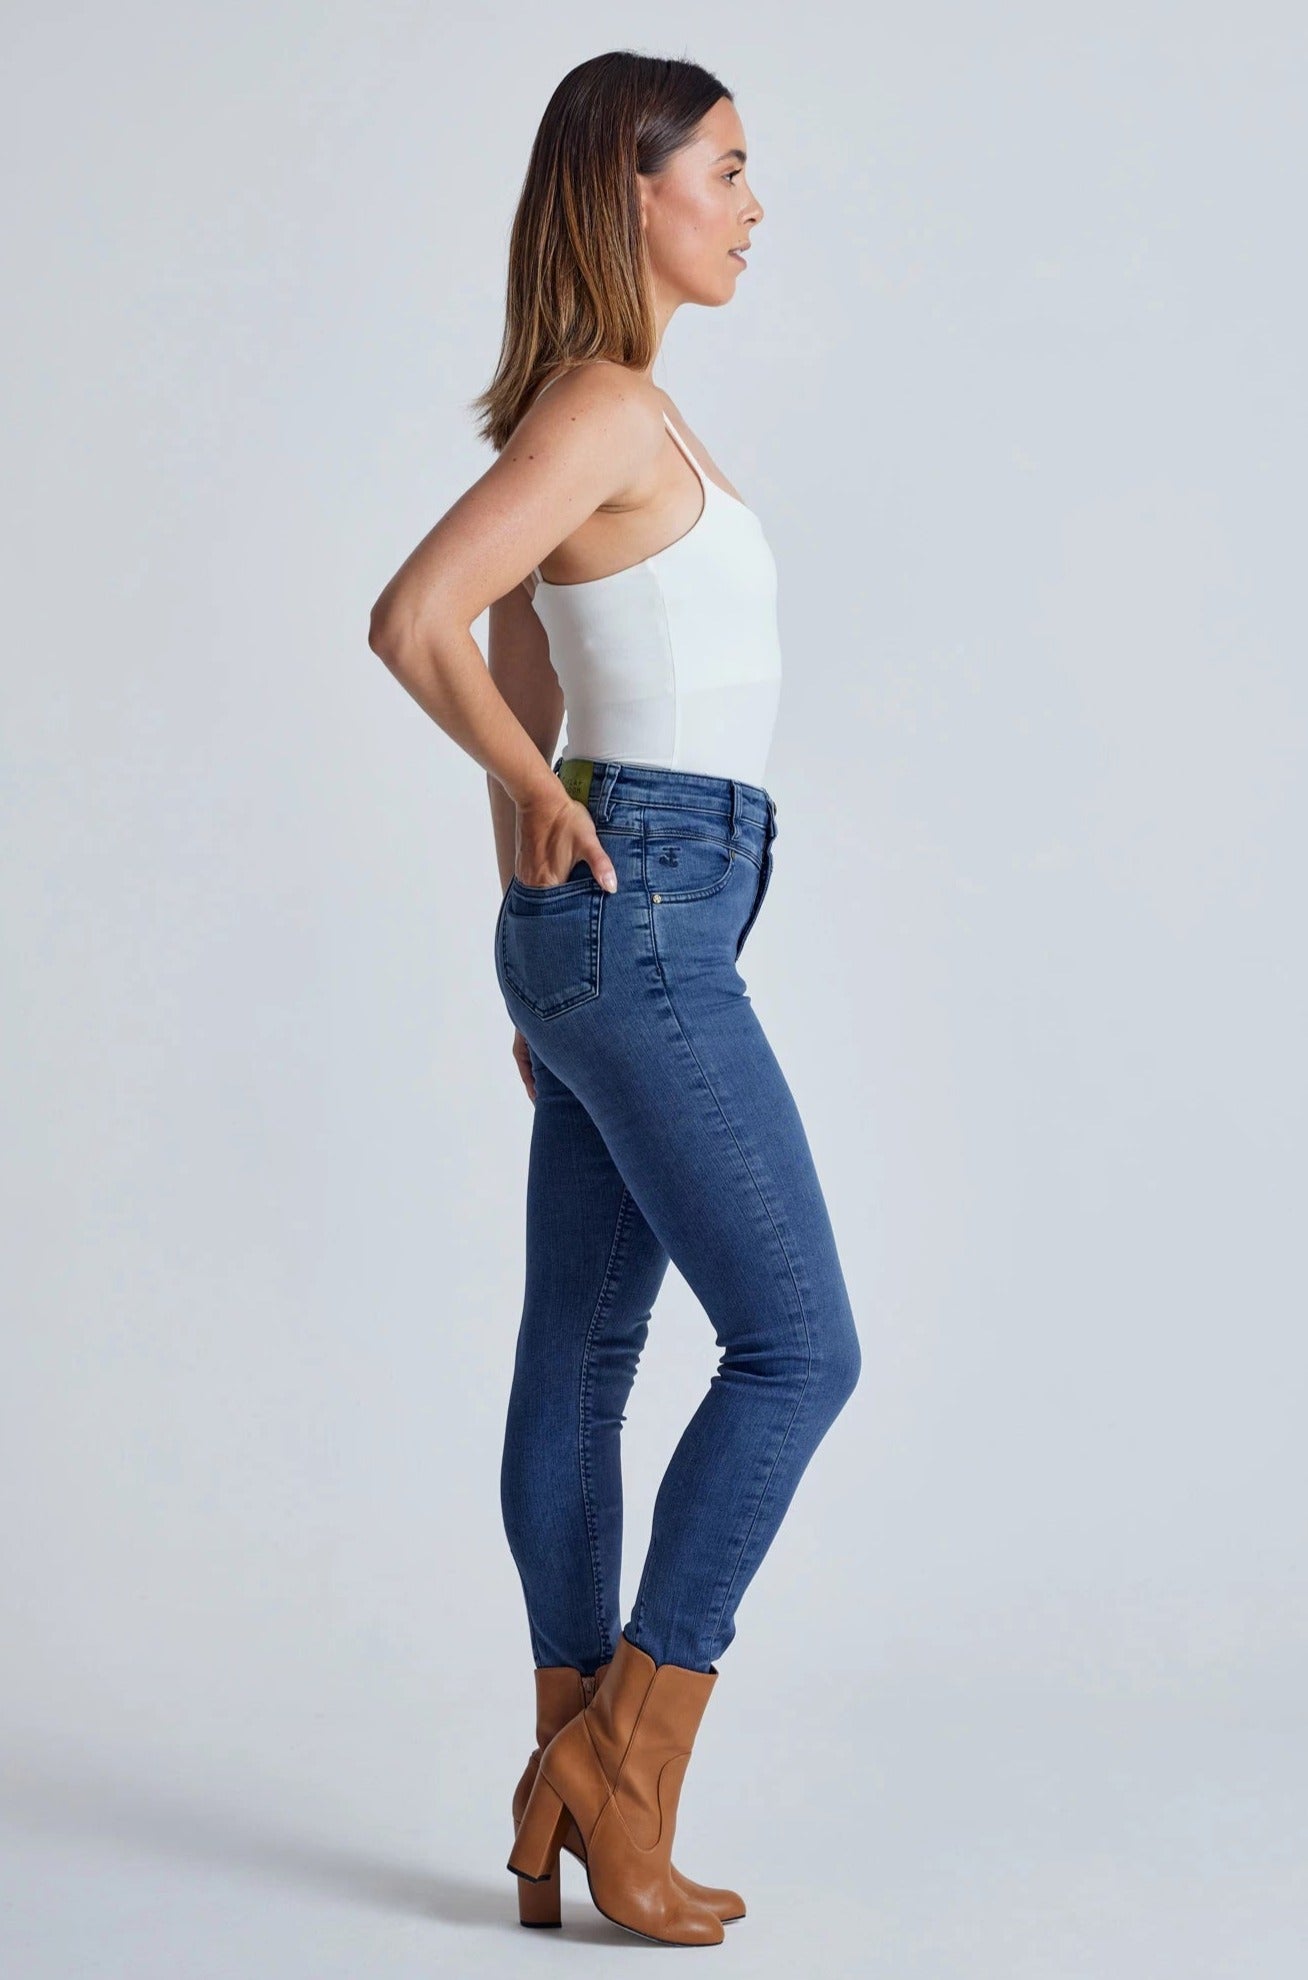 High Waisted Gray Coated Skinny Jeans - GOODIES COLLECTIONS BY J&F